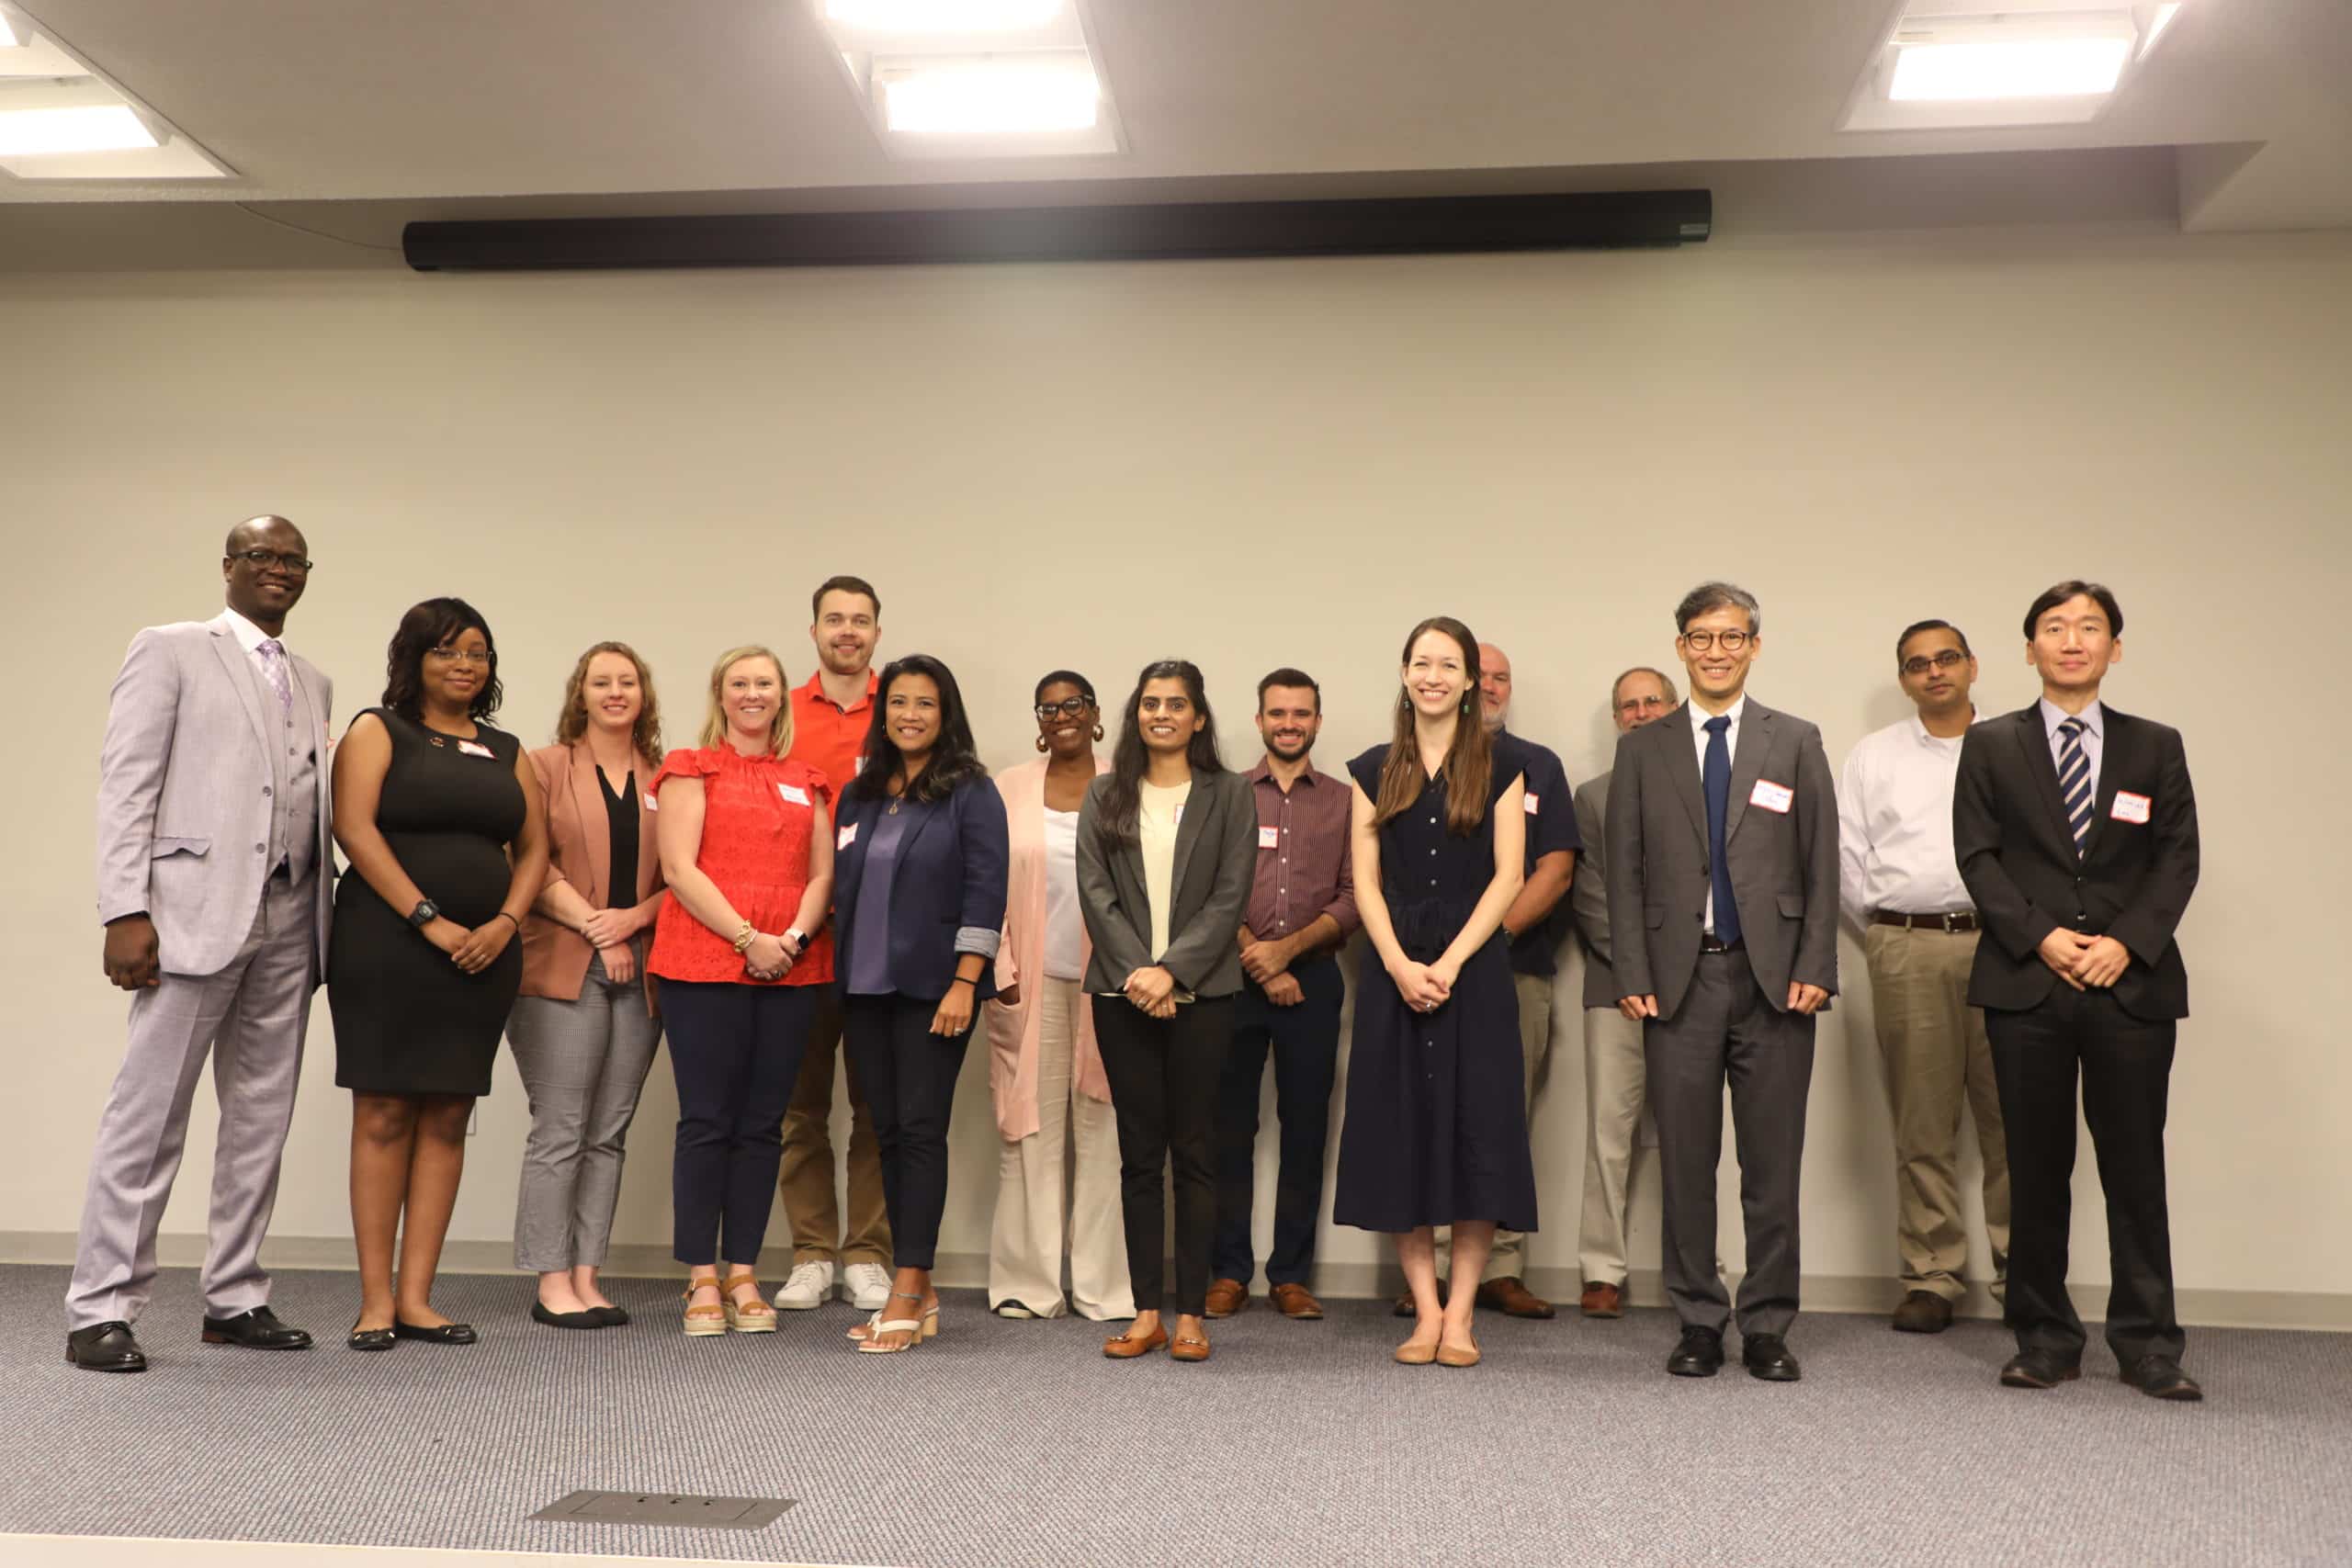 FMU welcomes new faculty for 2022-23 academic year